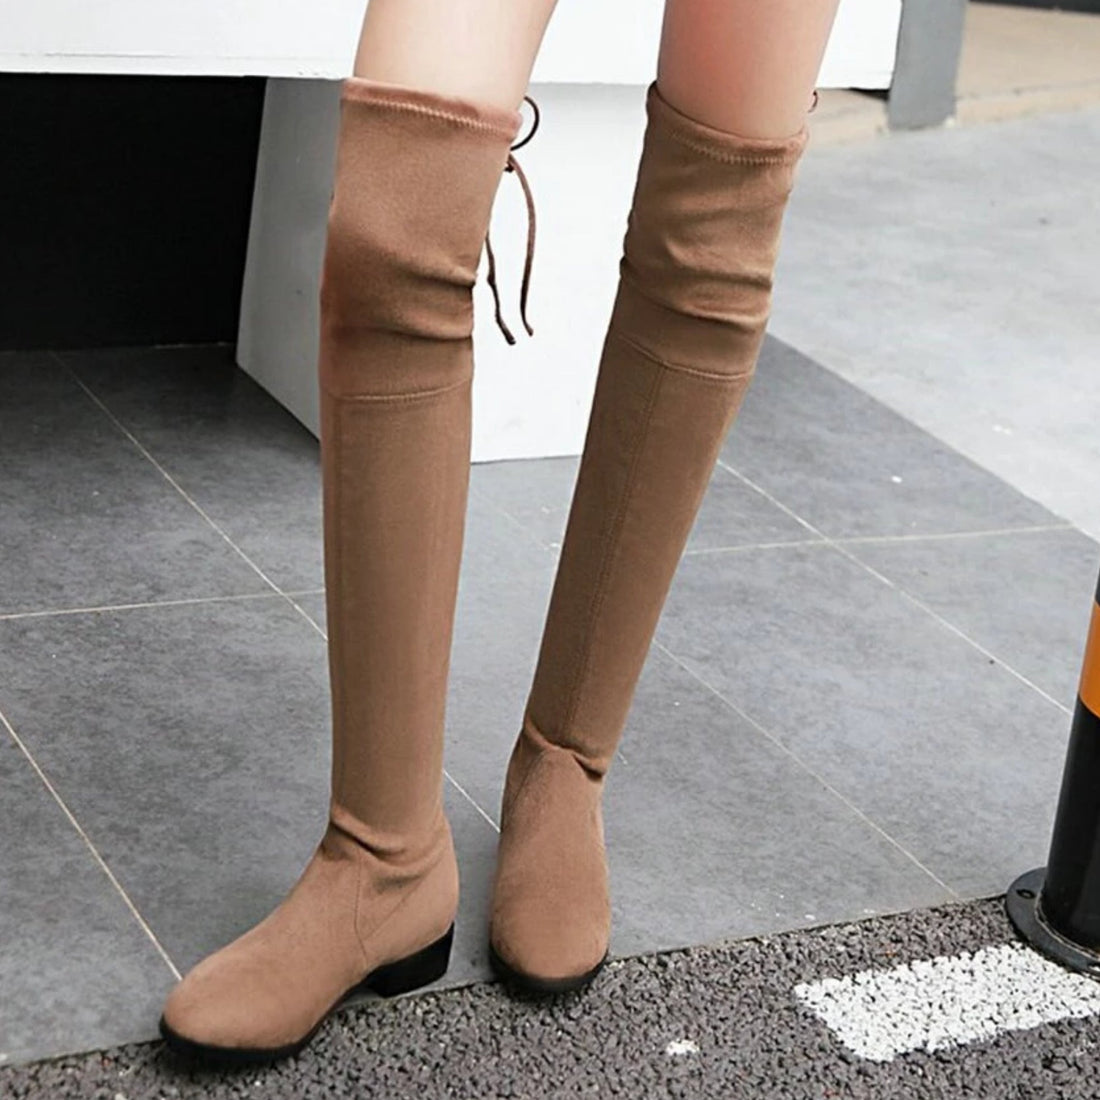 Women's Spring/Autumn High Boots With Square Low Heels